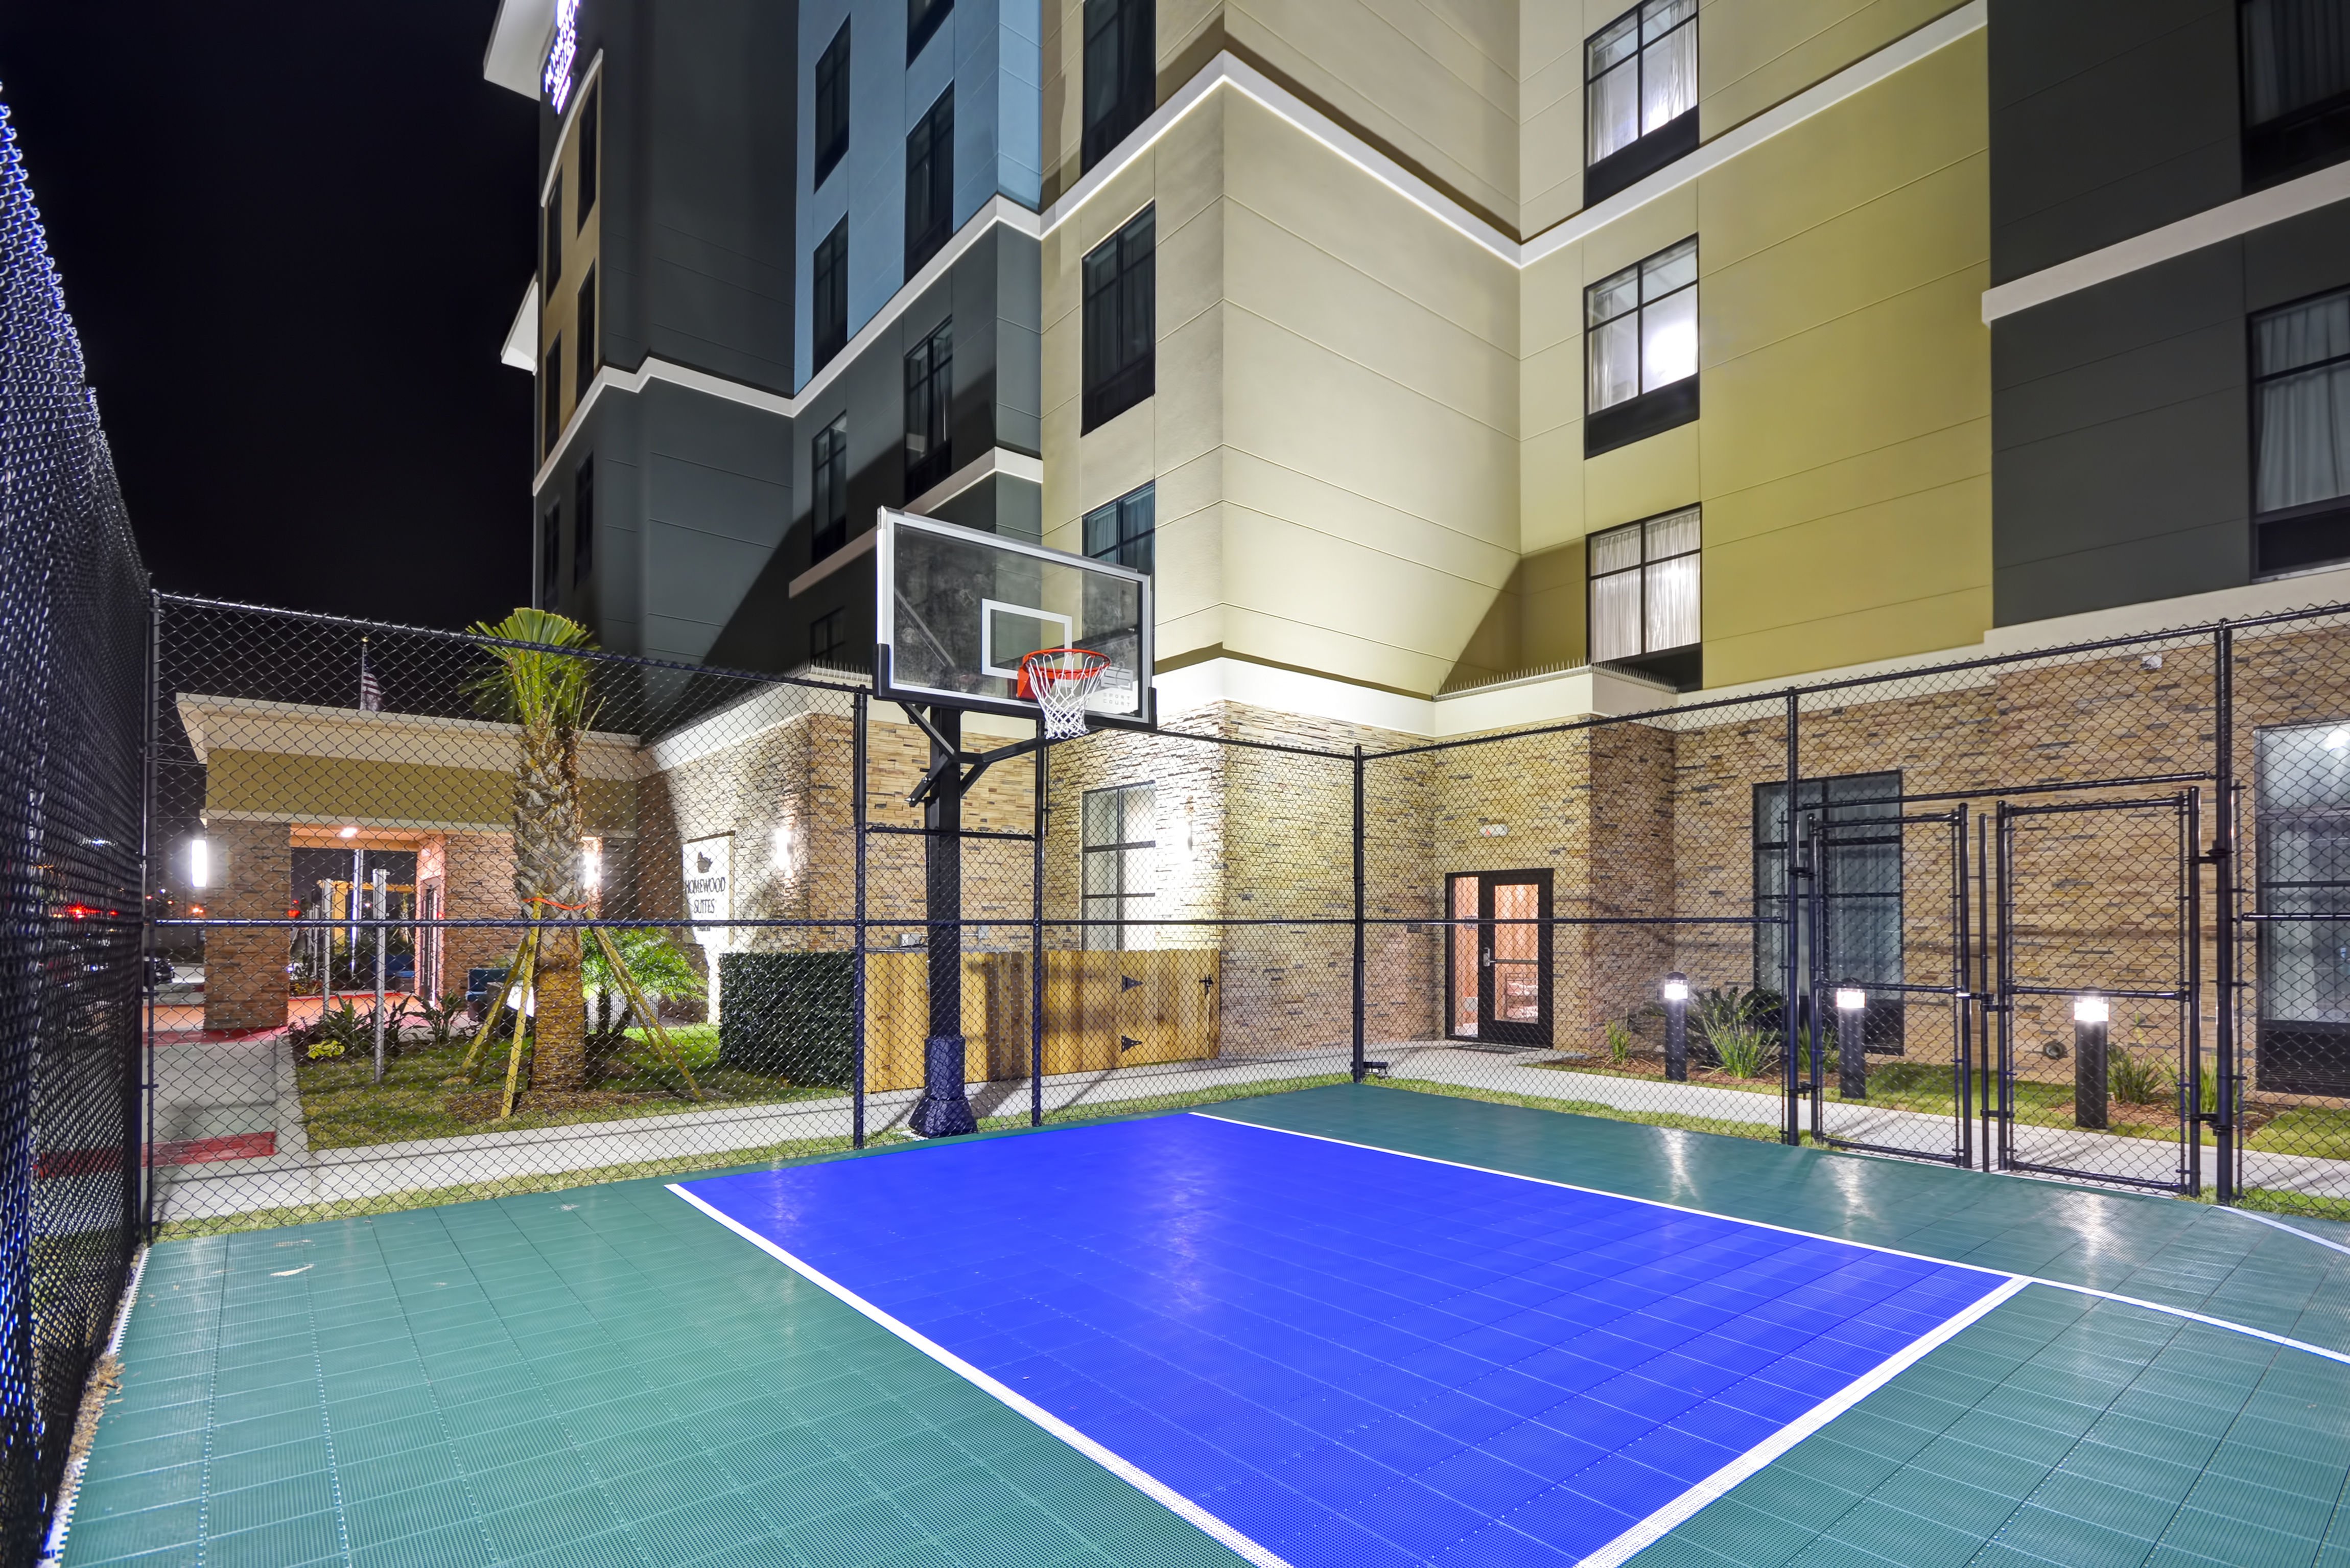 On-Site Basketball Court at Night